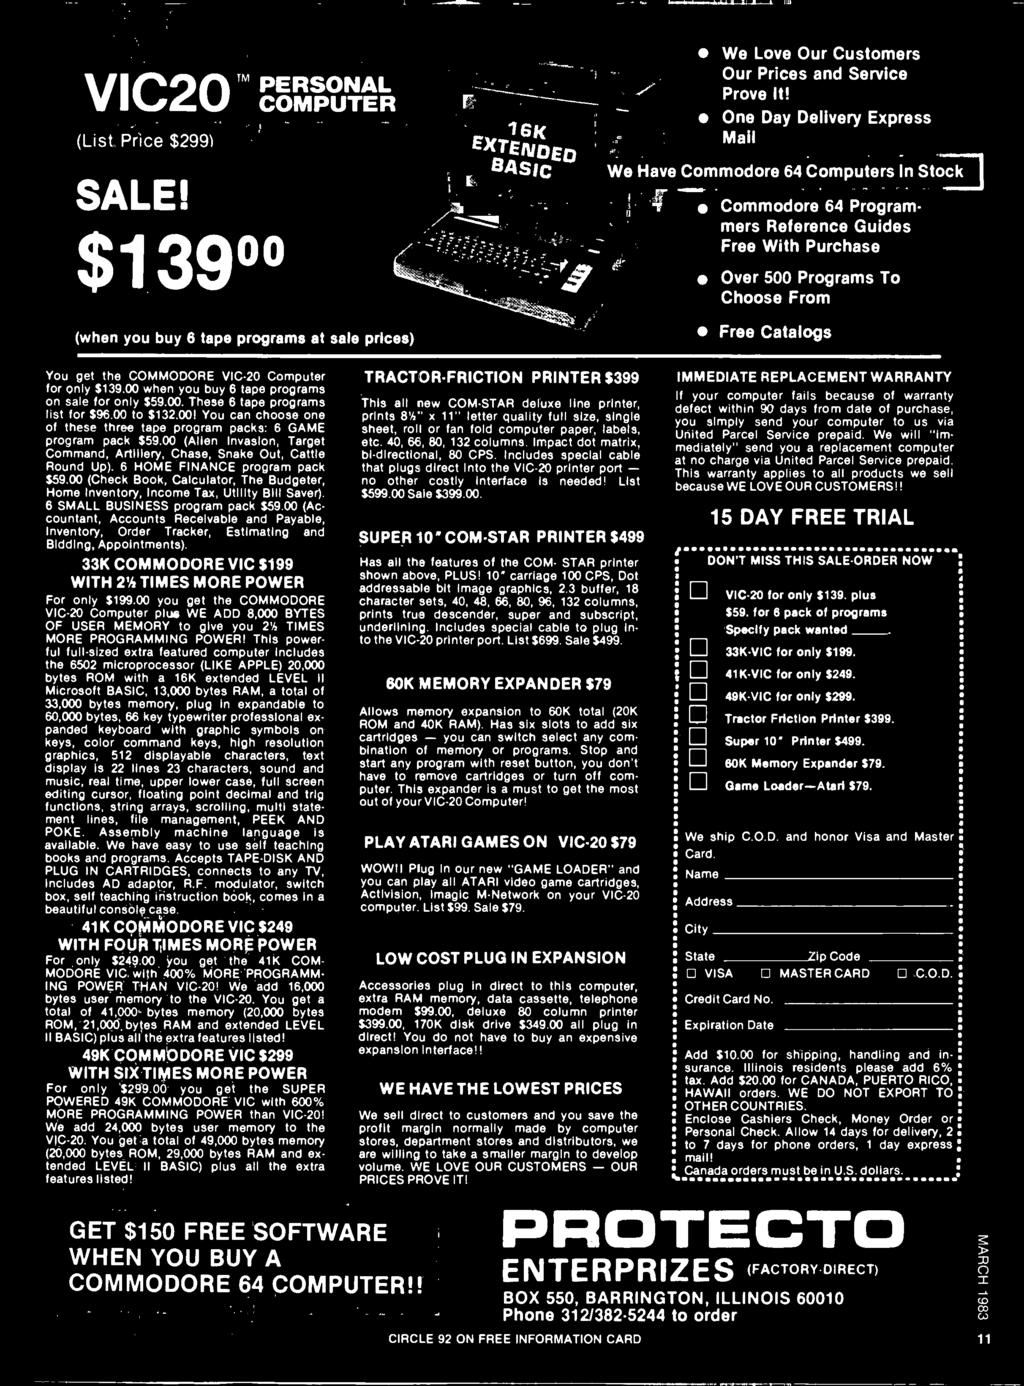 COMMODORE VIC-20 Computer for only $139.00 when you buy 6 tape programs on sale for only $59.00. These 6 tape programs list for $96.00 to $132.